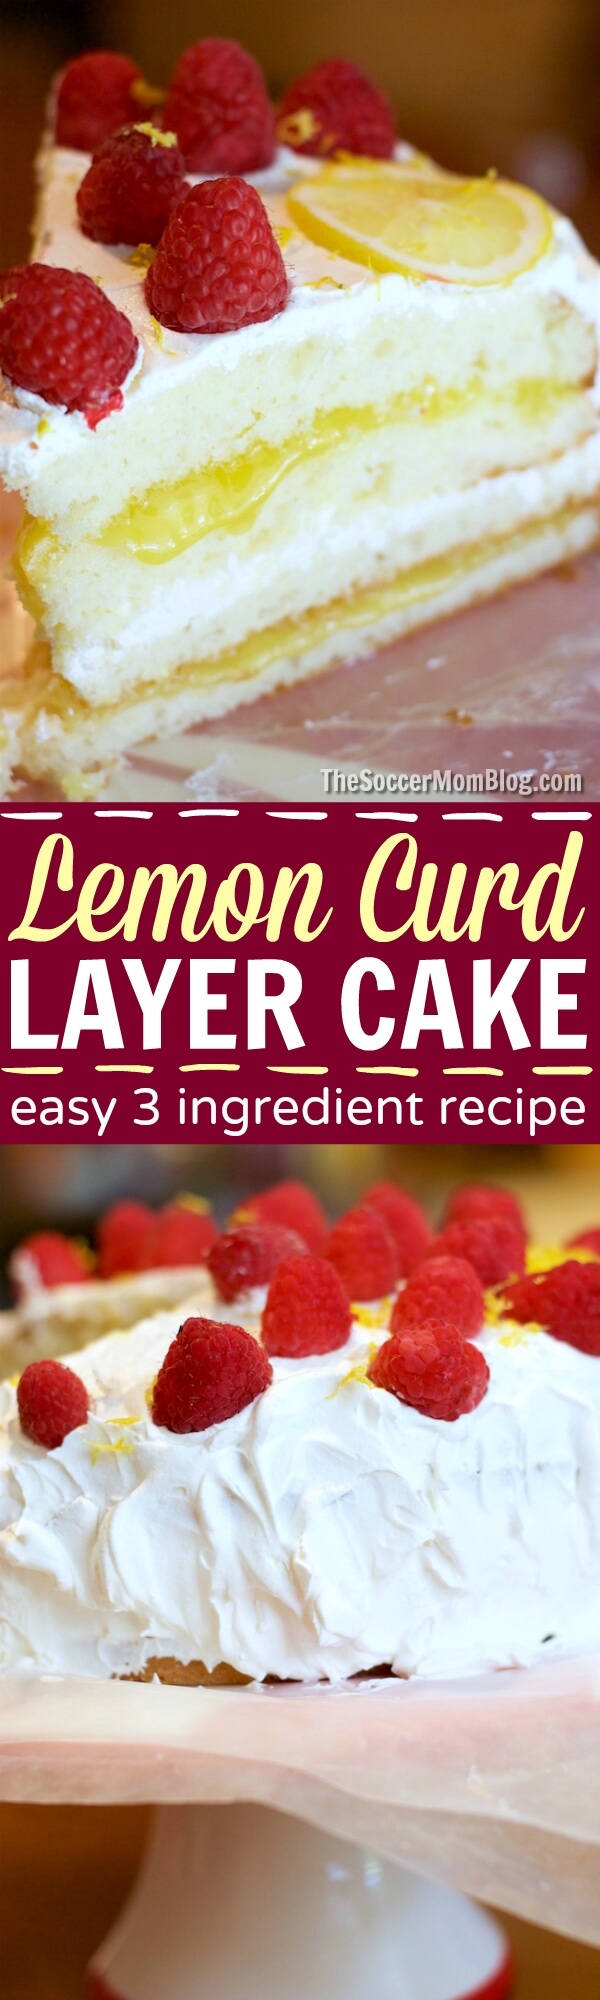 Step aside chocolate, this absolutely divine lemon curd layer cake is the new special favorite occasion dessert in town! SUPER easy (only 3 ingredients)